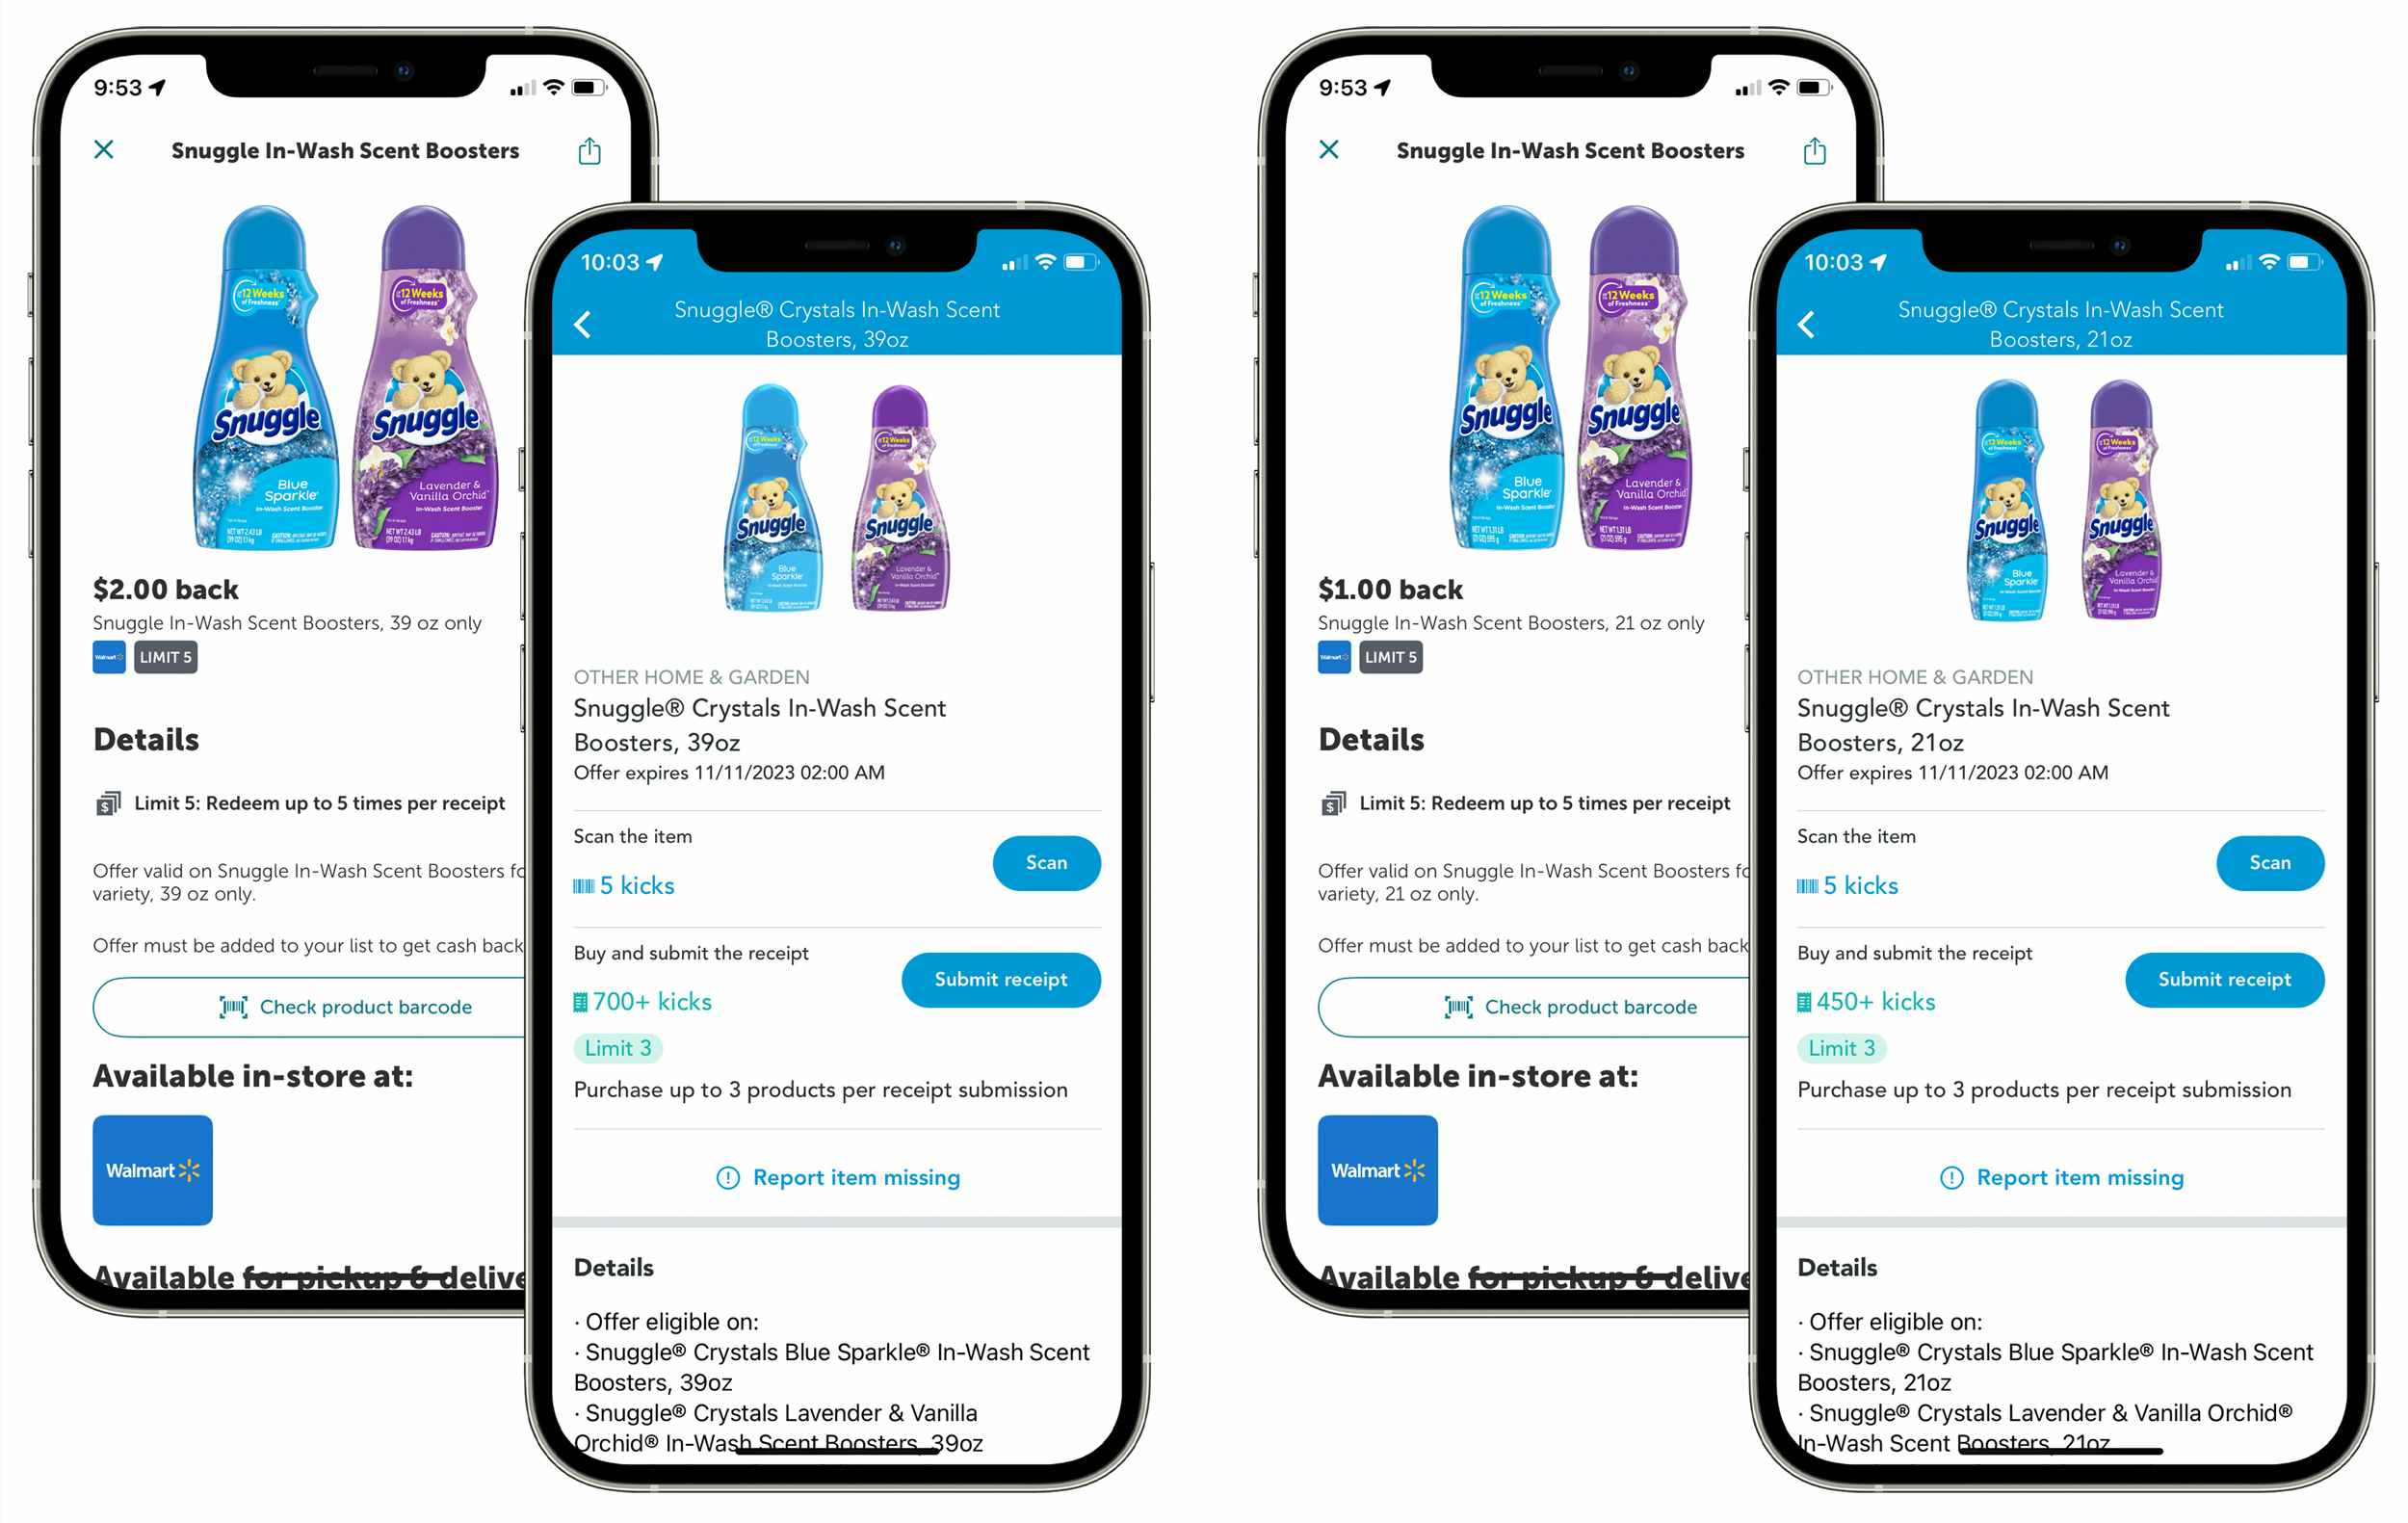 iphone screenshots showing offers for snuggle crystals in-wash scent boosters at walmart in ibotta and shopkick apps